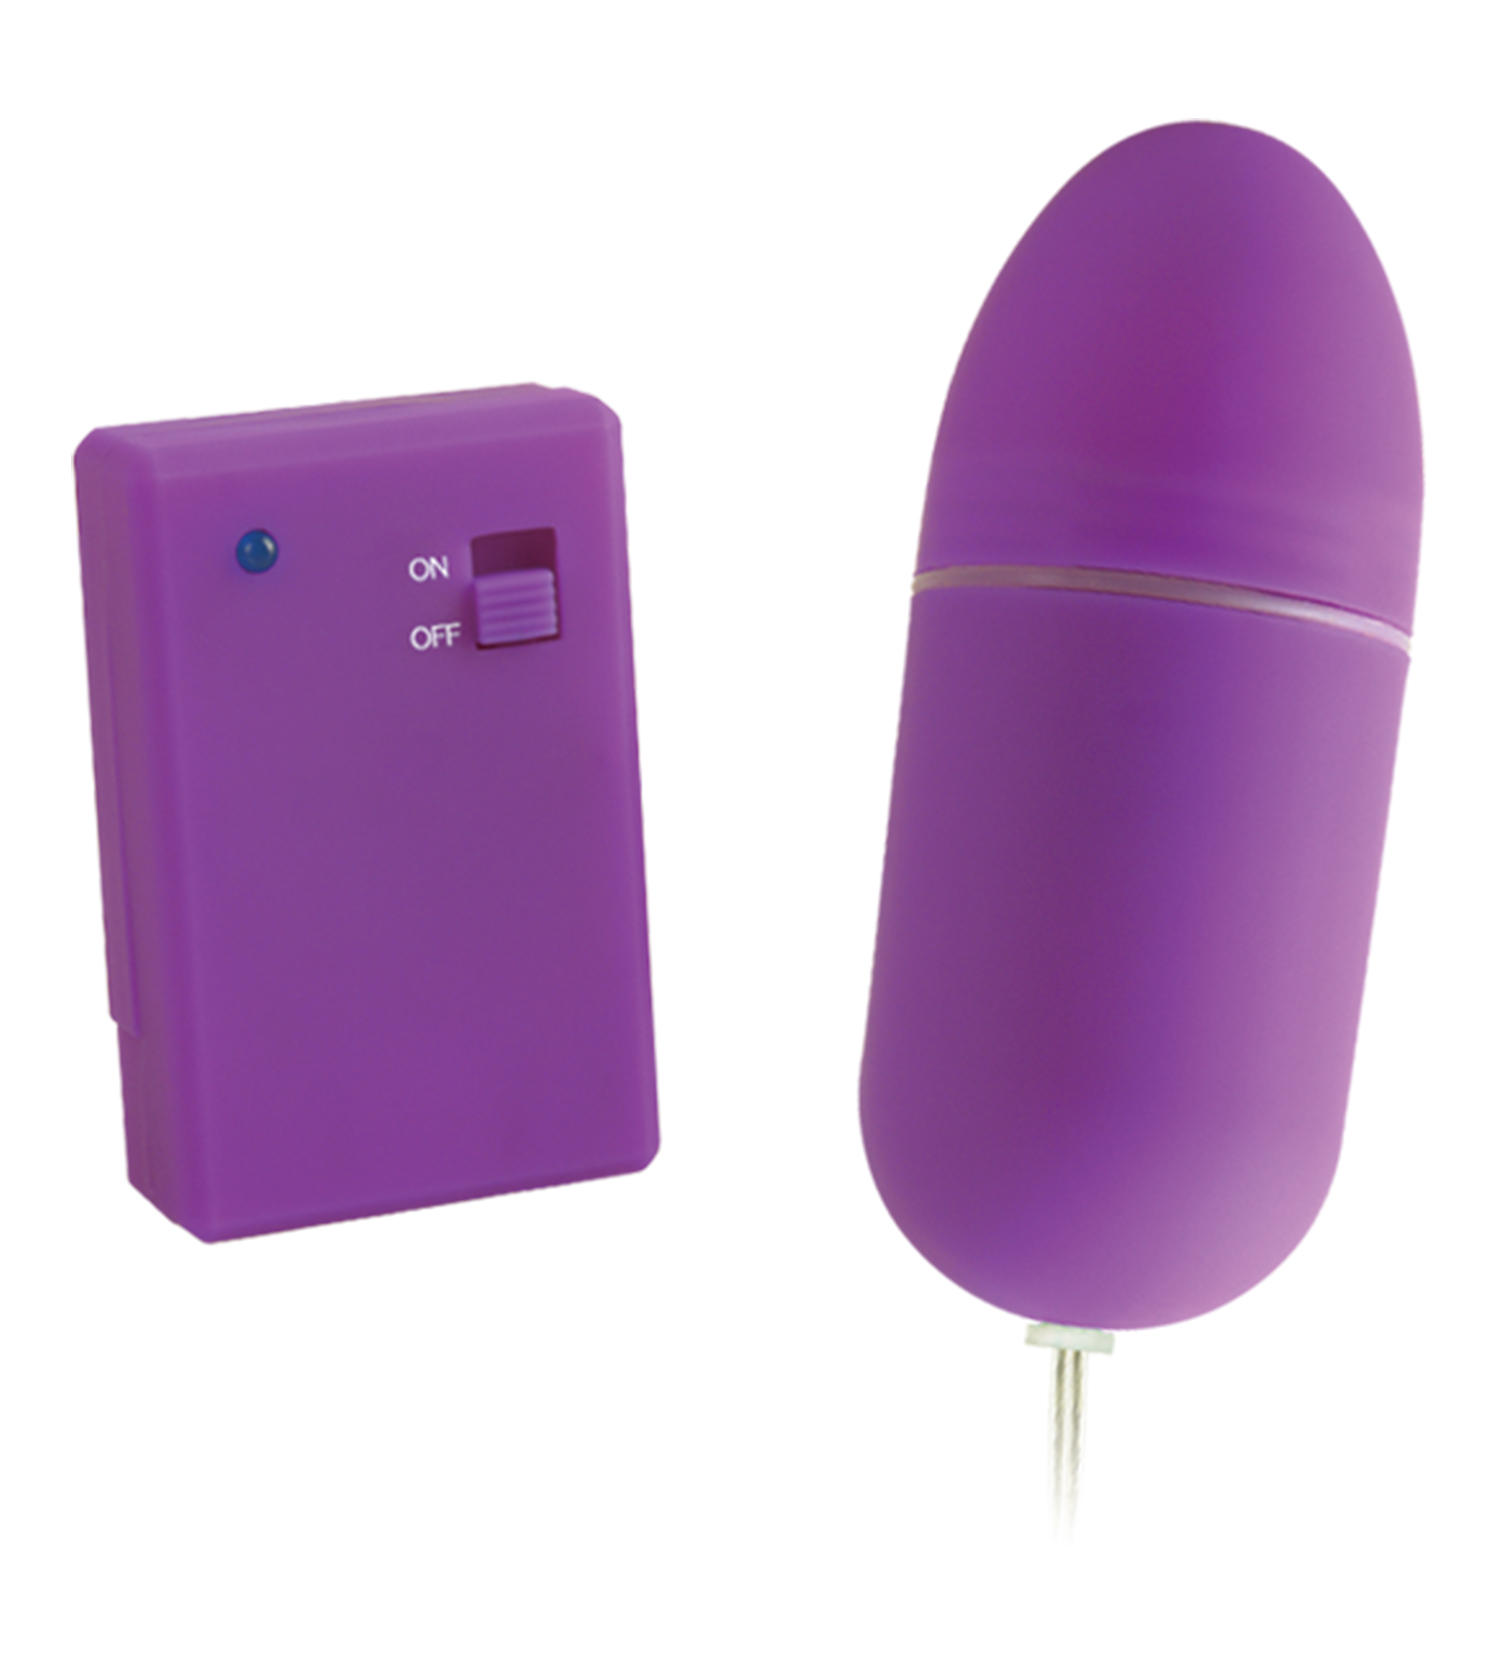 NEON LUV TOUCH REMOTE CONTROL BULLET PURPLE - PD267412